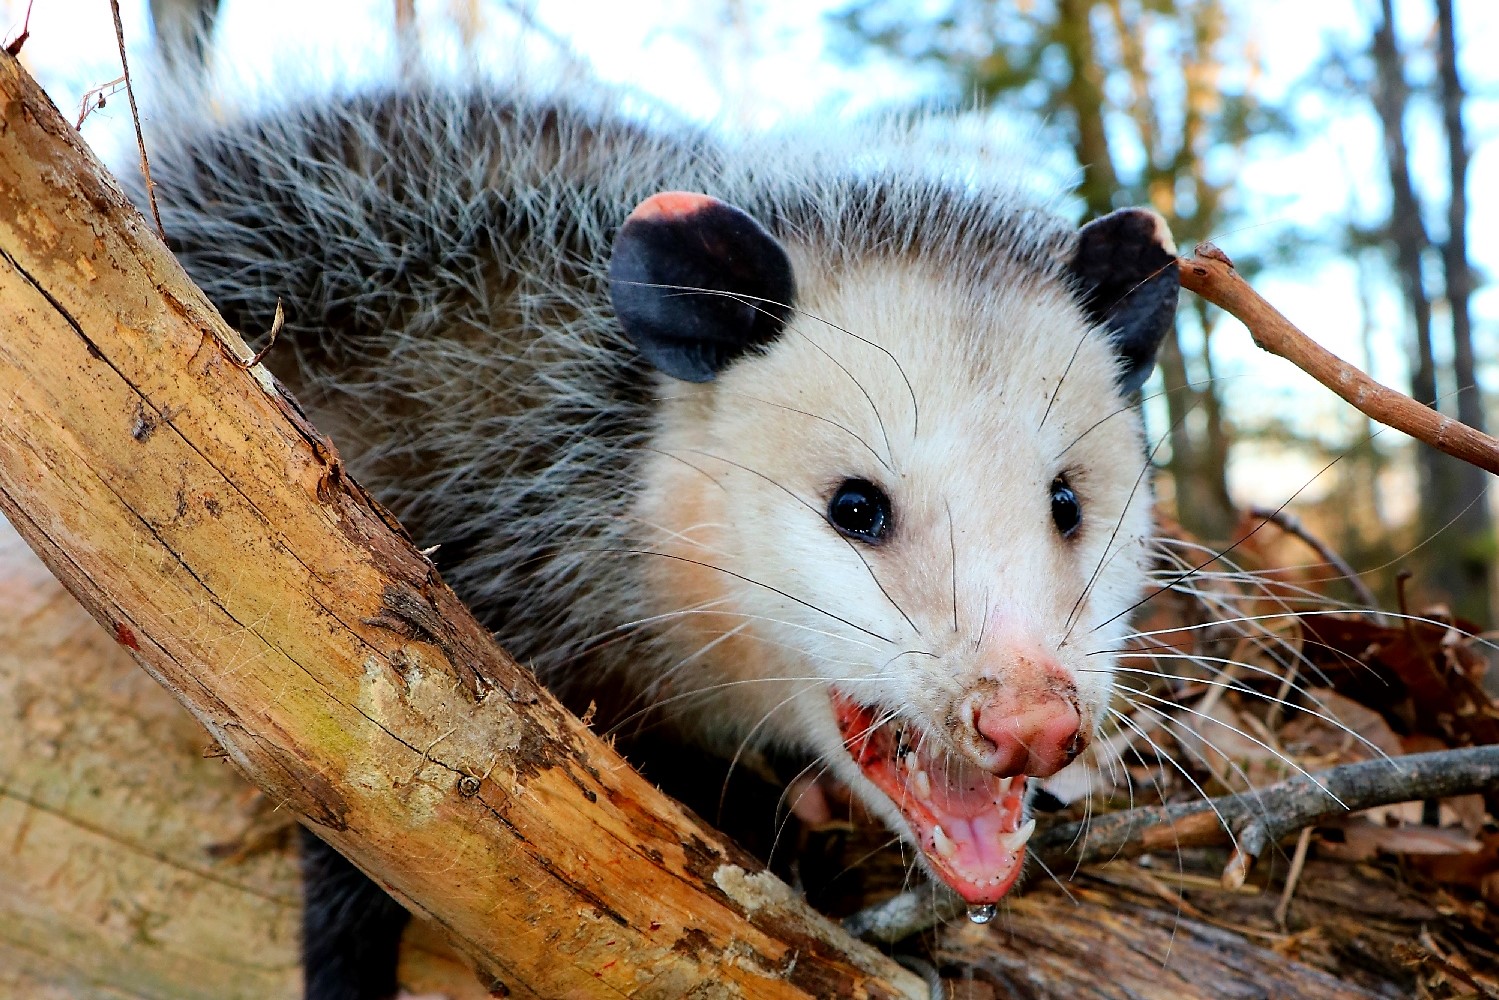 Possums – Odd and Ancient (Part 2 of 2)